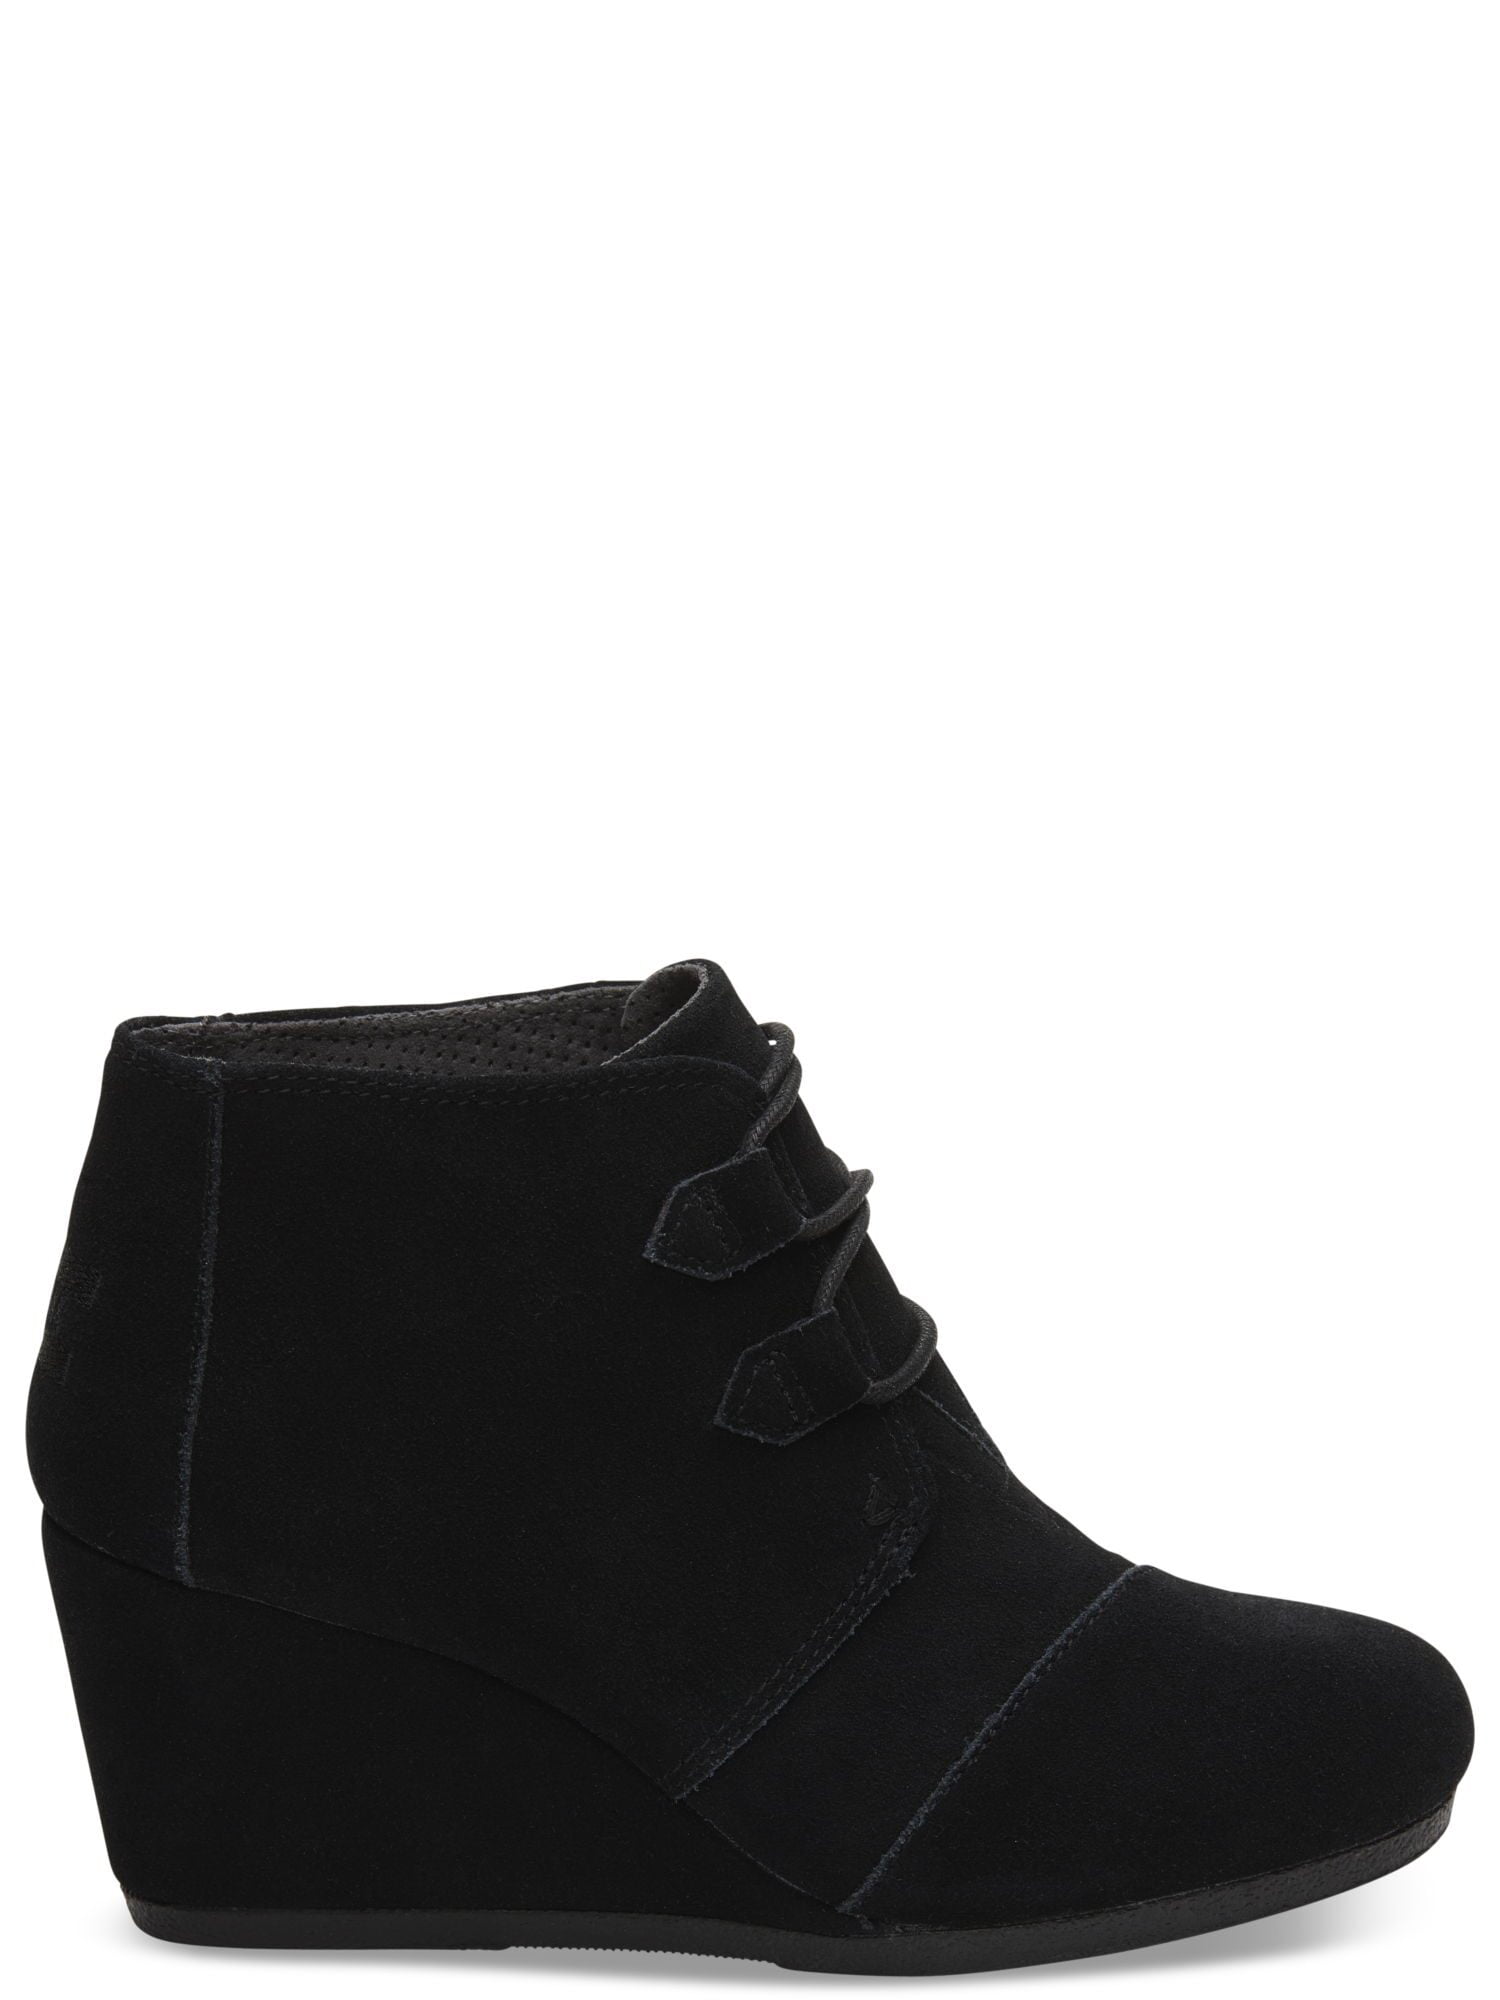 toms lace up wedge booties